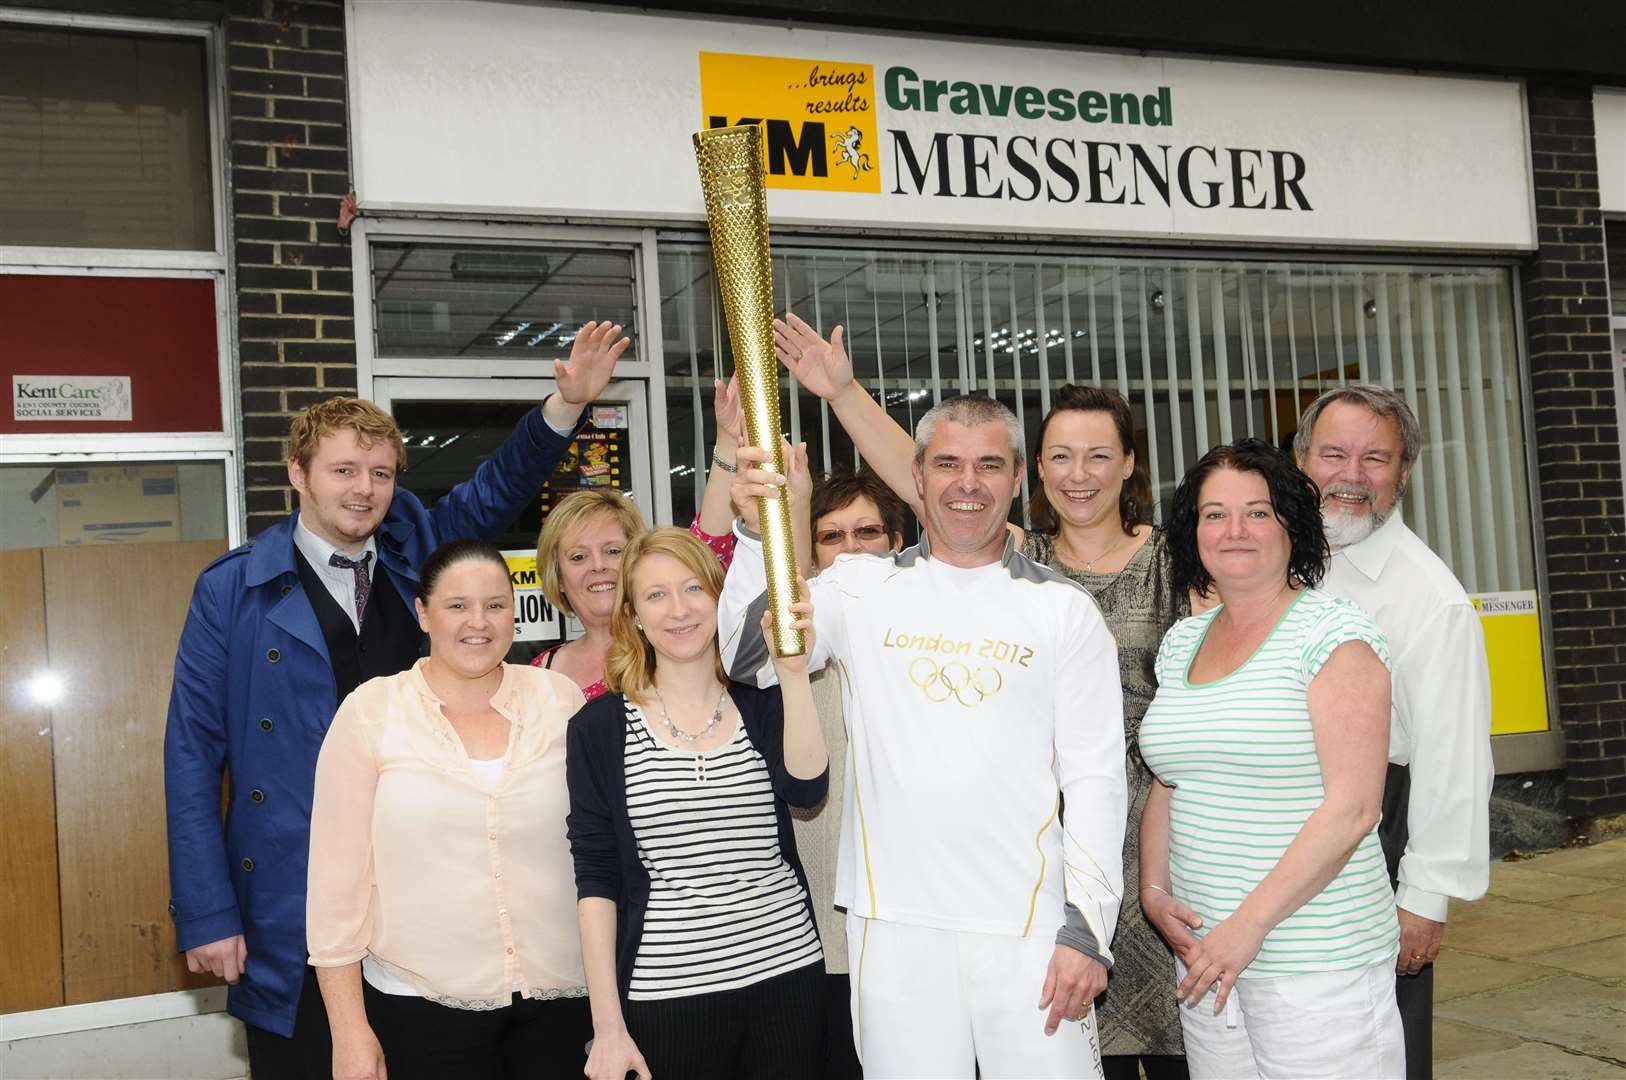 Paul Cloke, who carried the Olympic torch in Sheffield, with the KM's Gravesend Messenger team